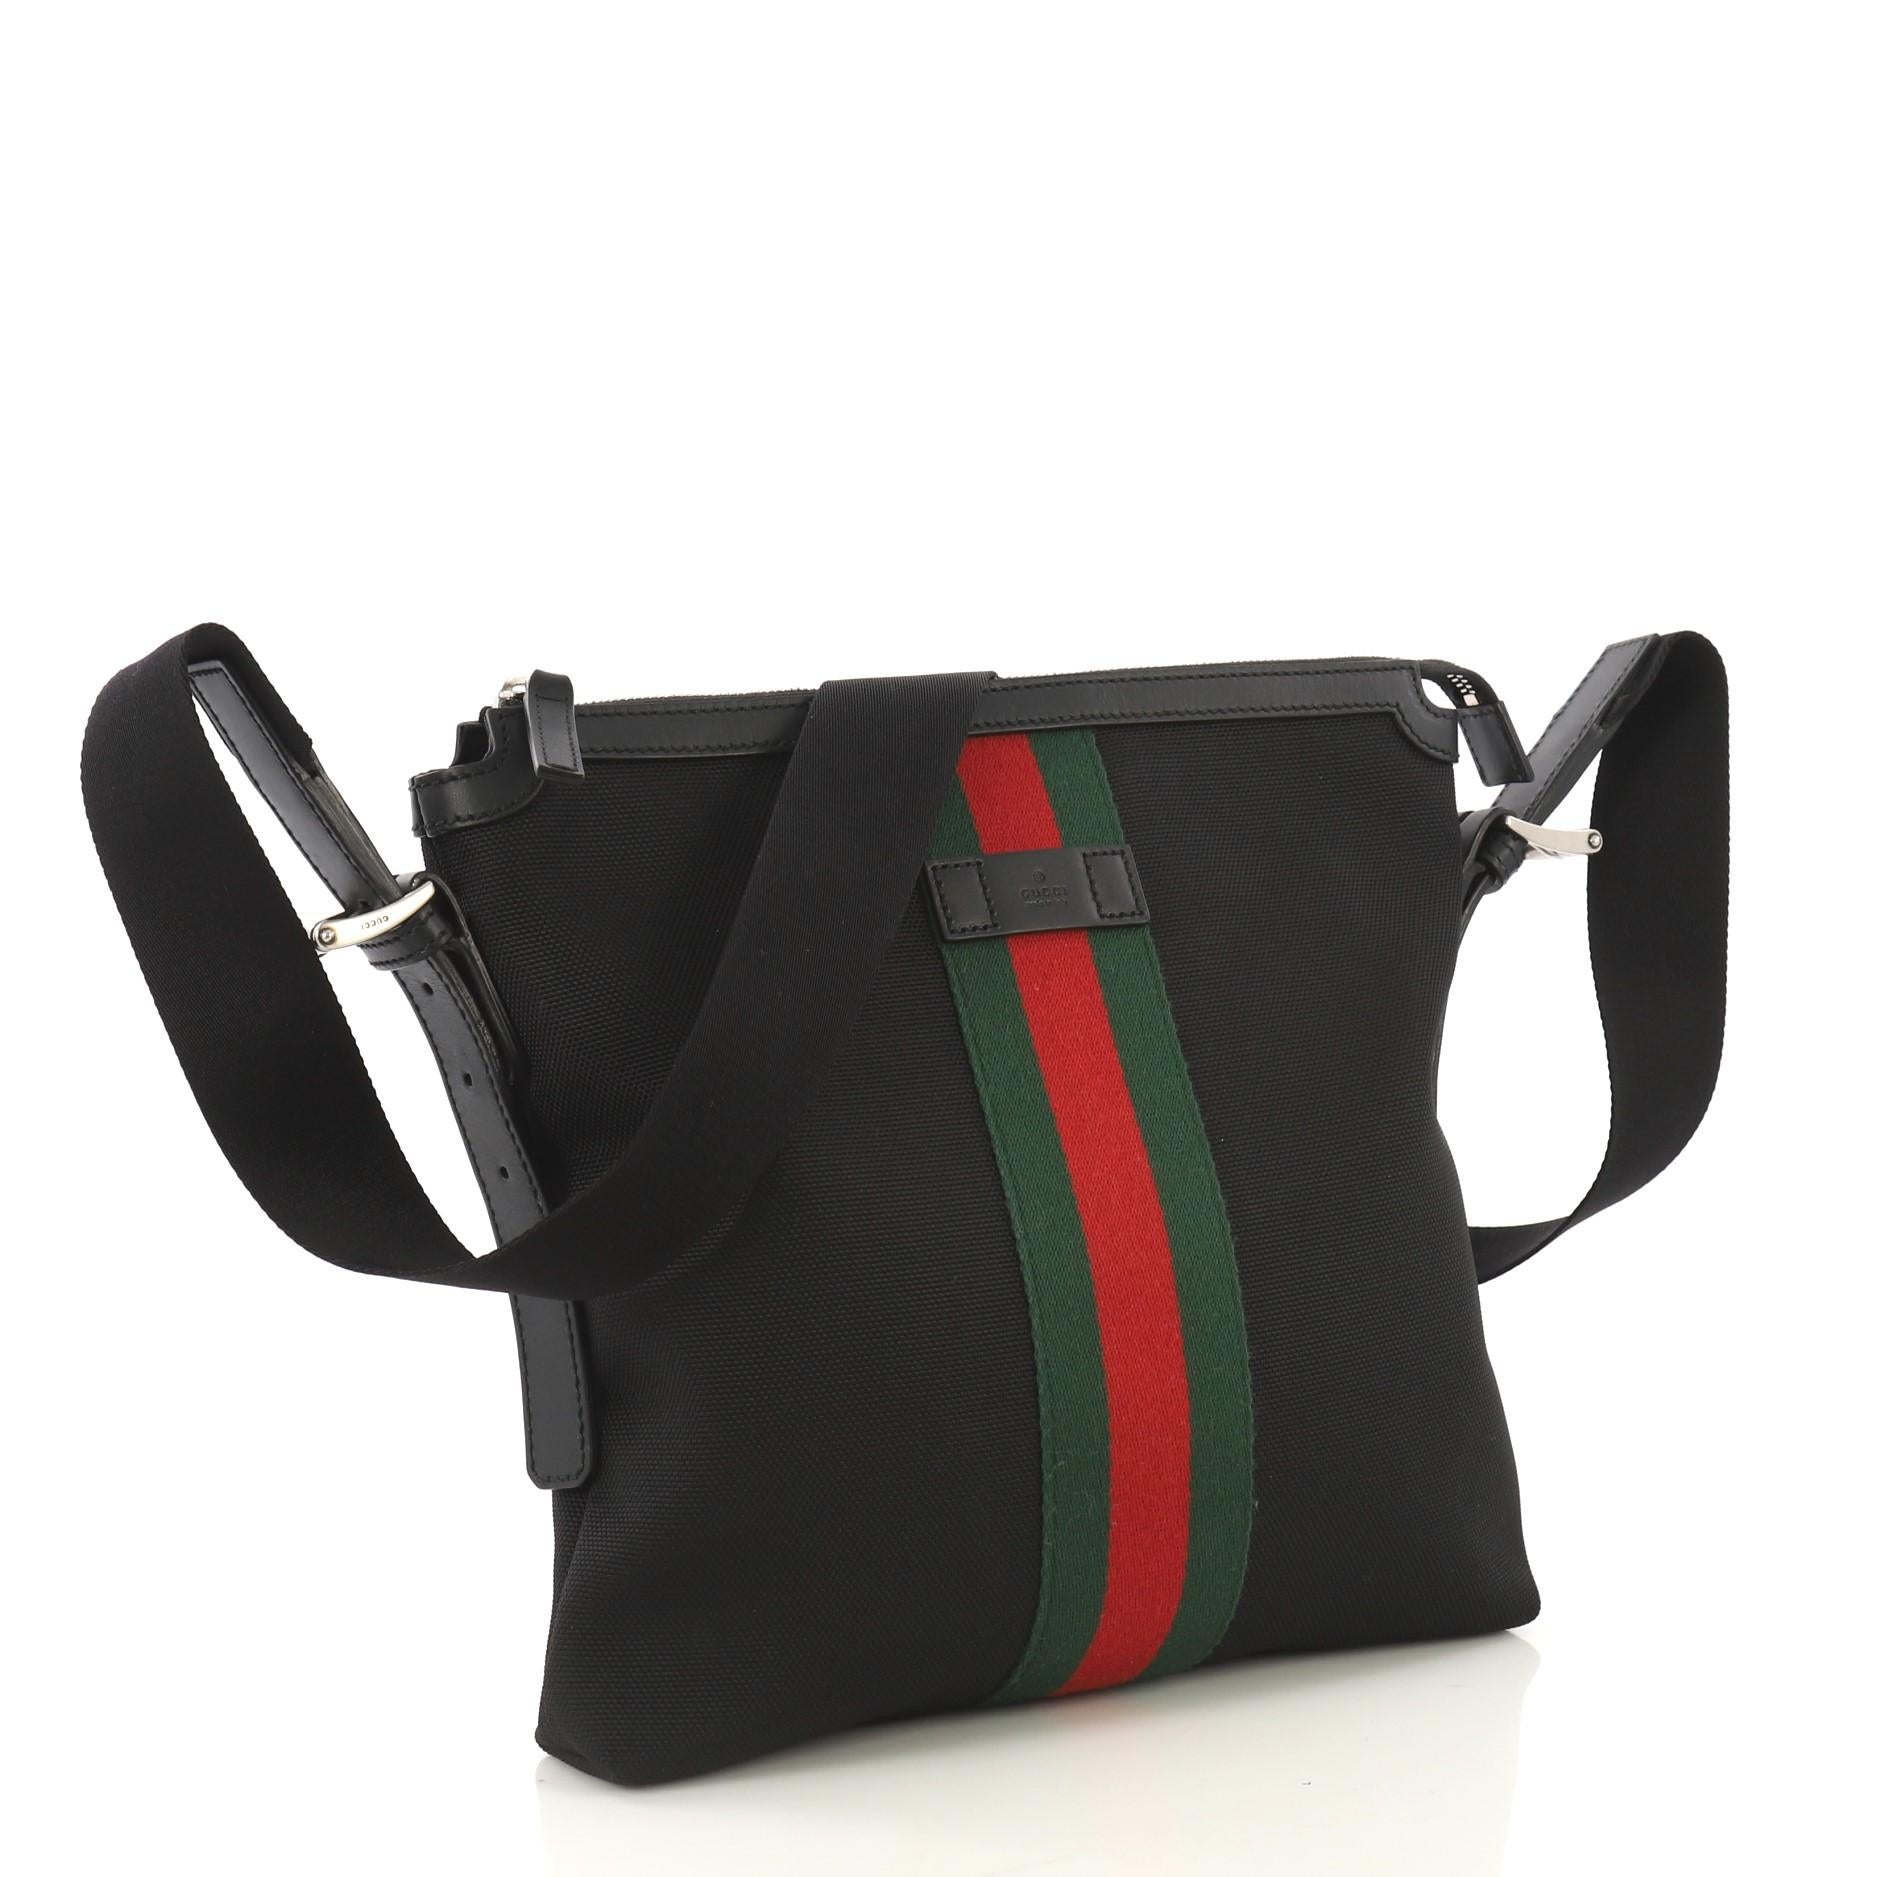 This Gucci Web Messenger Bag Techno Canvas Medium, crafted from black techno canvas, features an adjustable canvas shoulder strap, red and green web detail, and silver-tone hardware. Its zip closure opens to a black nylon interior with side zip and